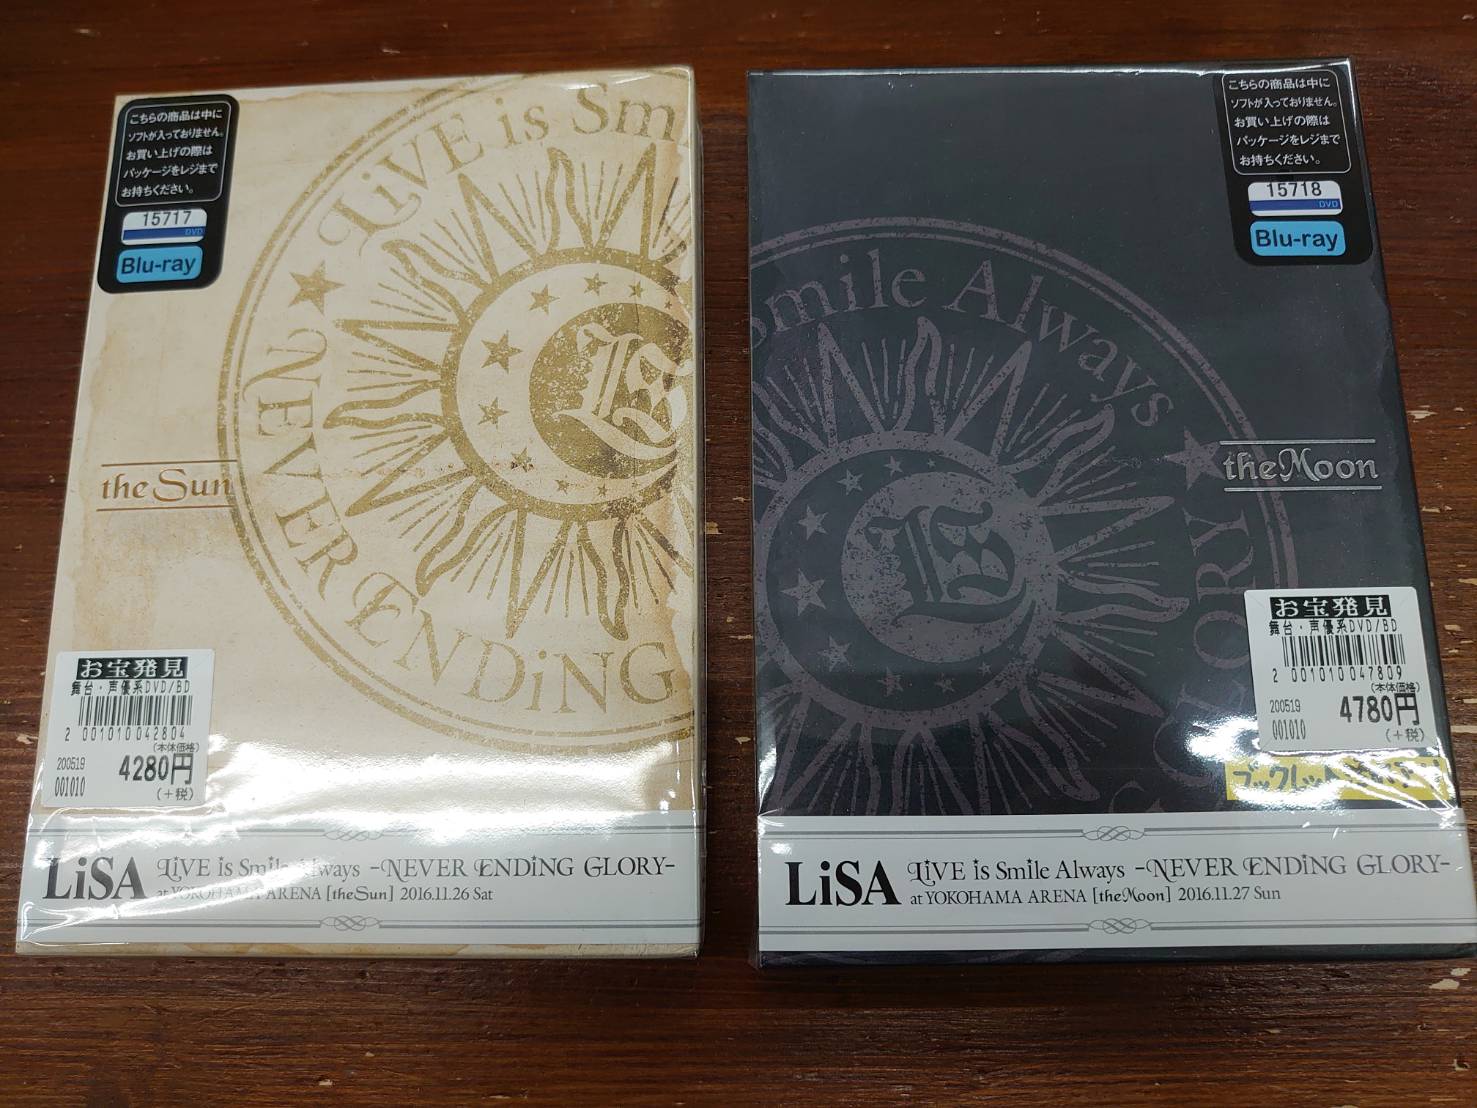 5 19 Lisaライブblu Ray買取させていただきました Live Is Smile Always Never Ending Glory Dvd マンガ倉庫 富山店